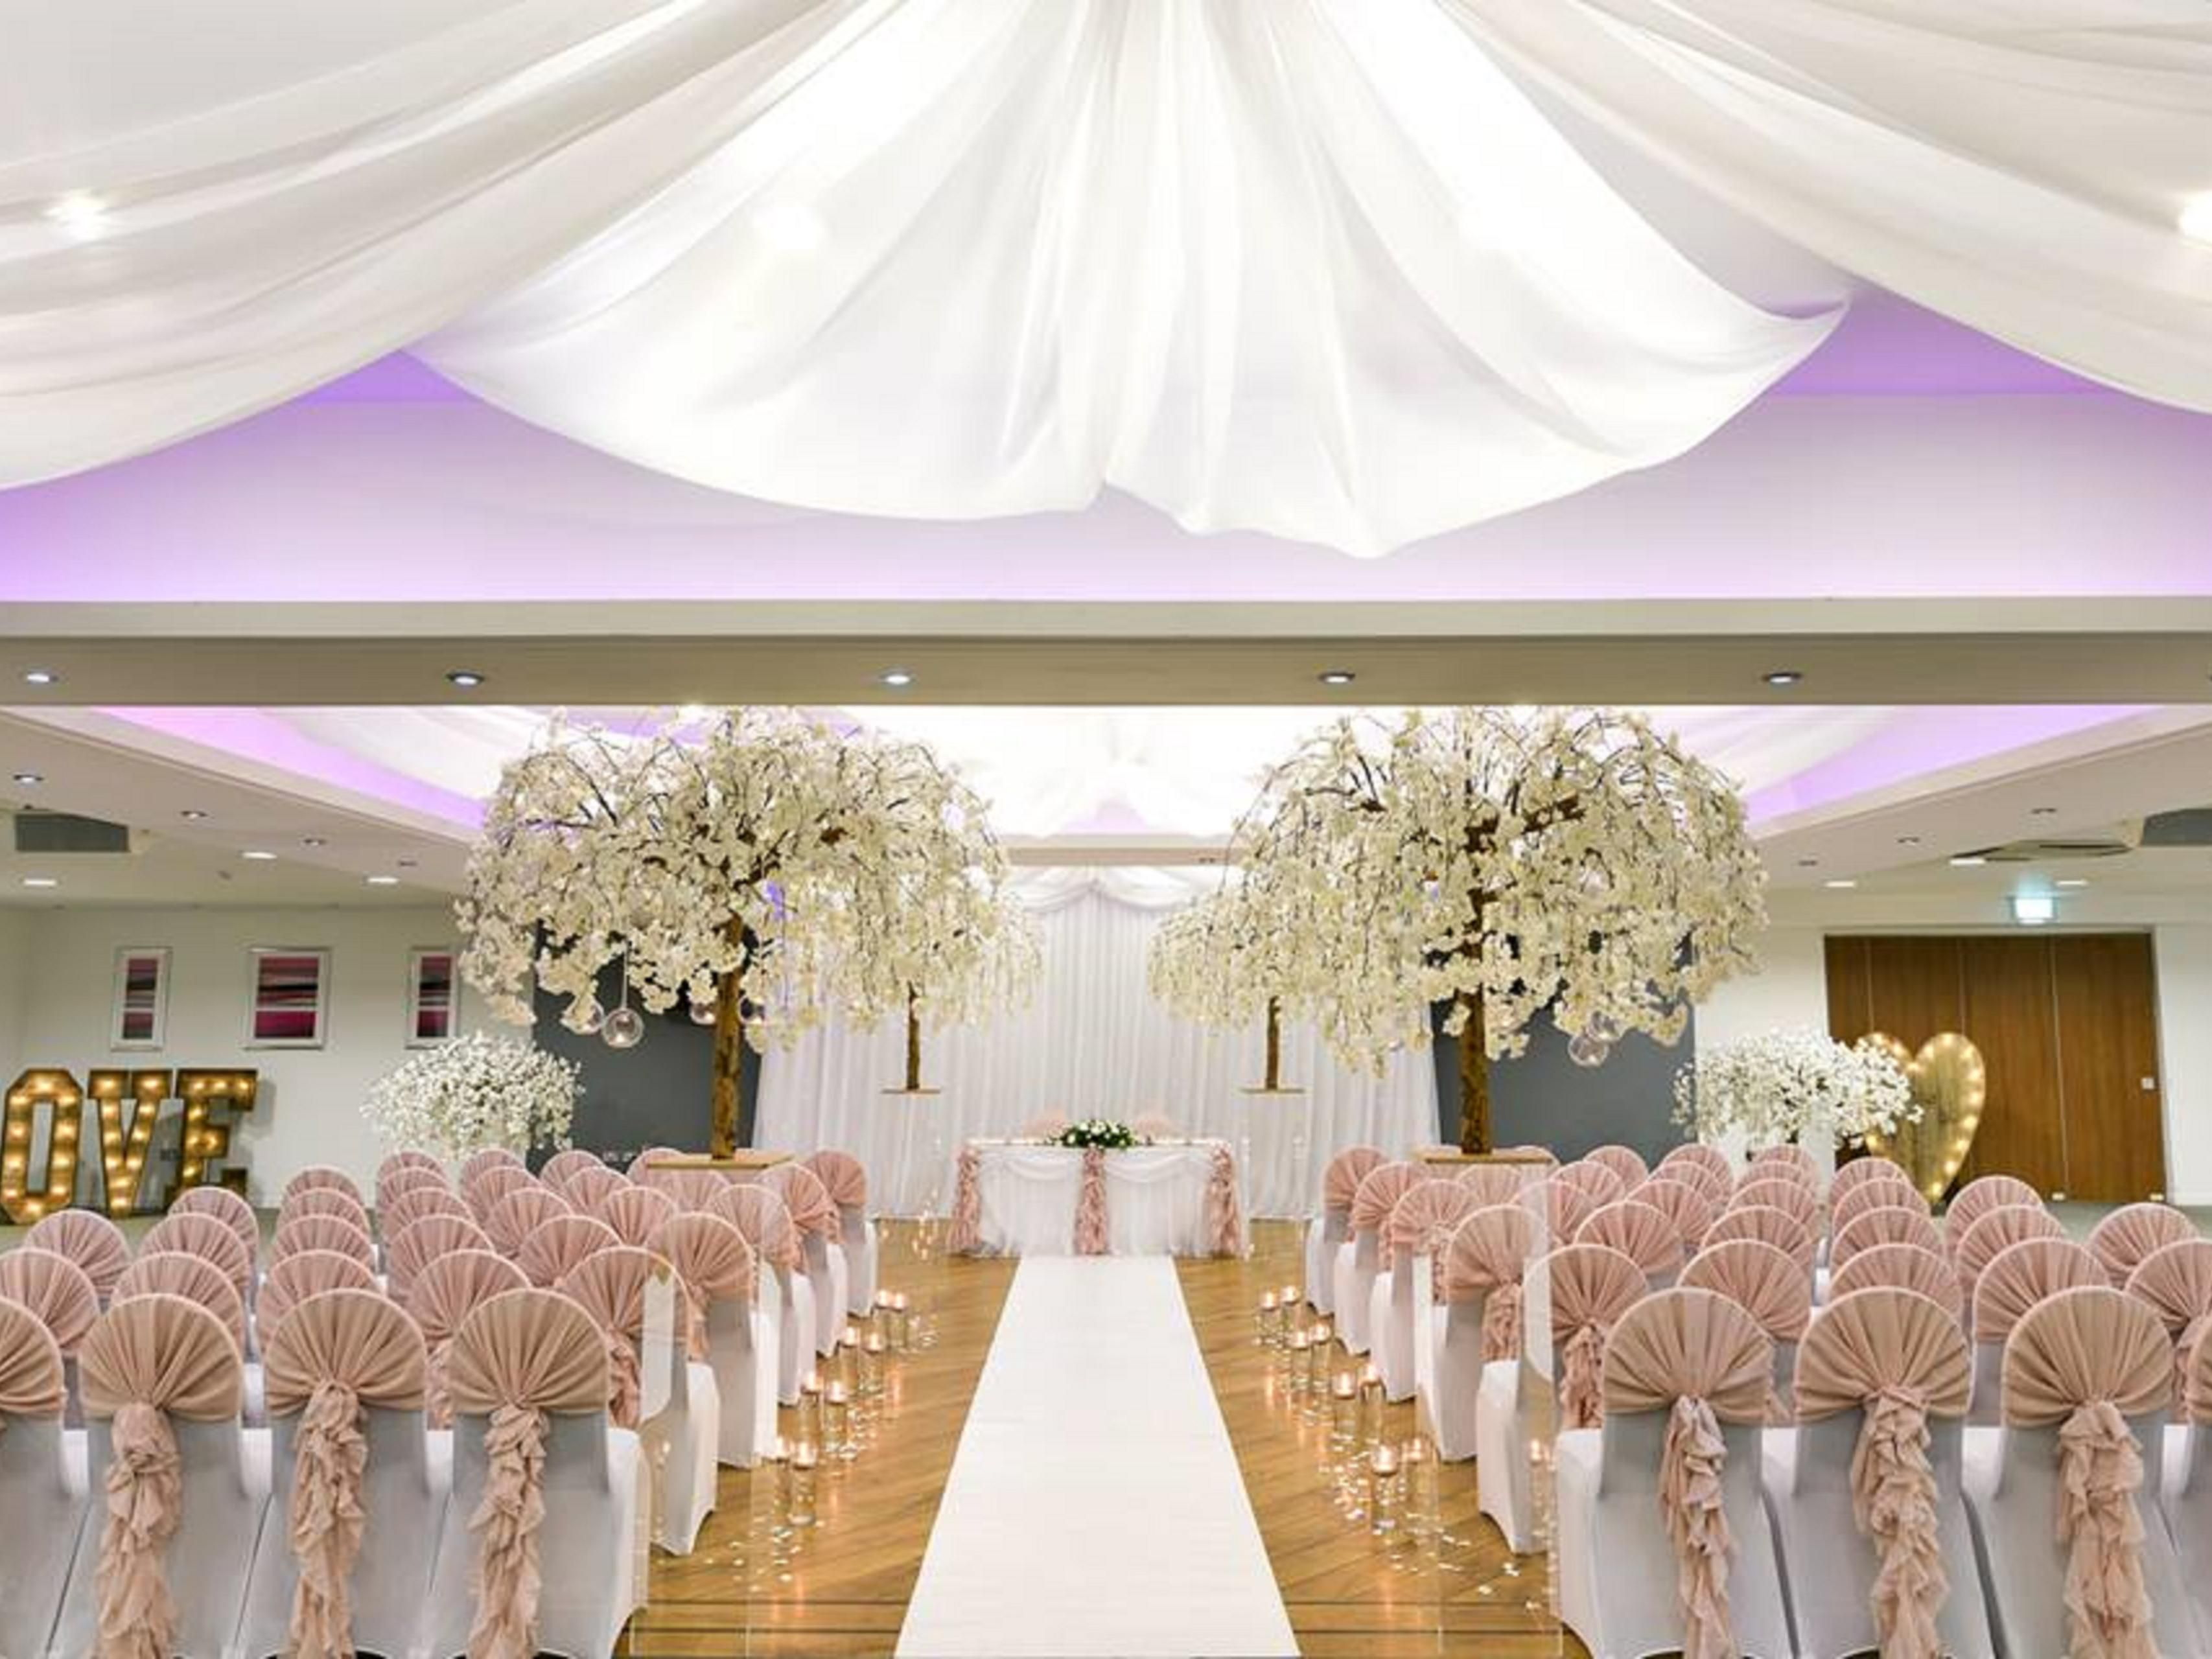 Situated at Holiday Inn Manchester Oldham, Smokies Park function suites offer an award winning facility with everything you need to make your wedding dreams come true! 